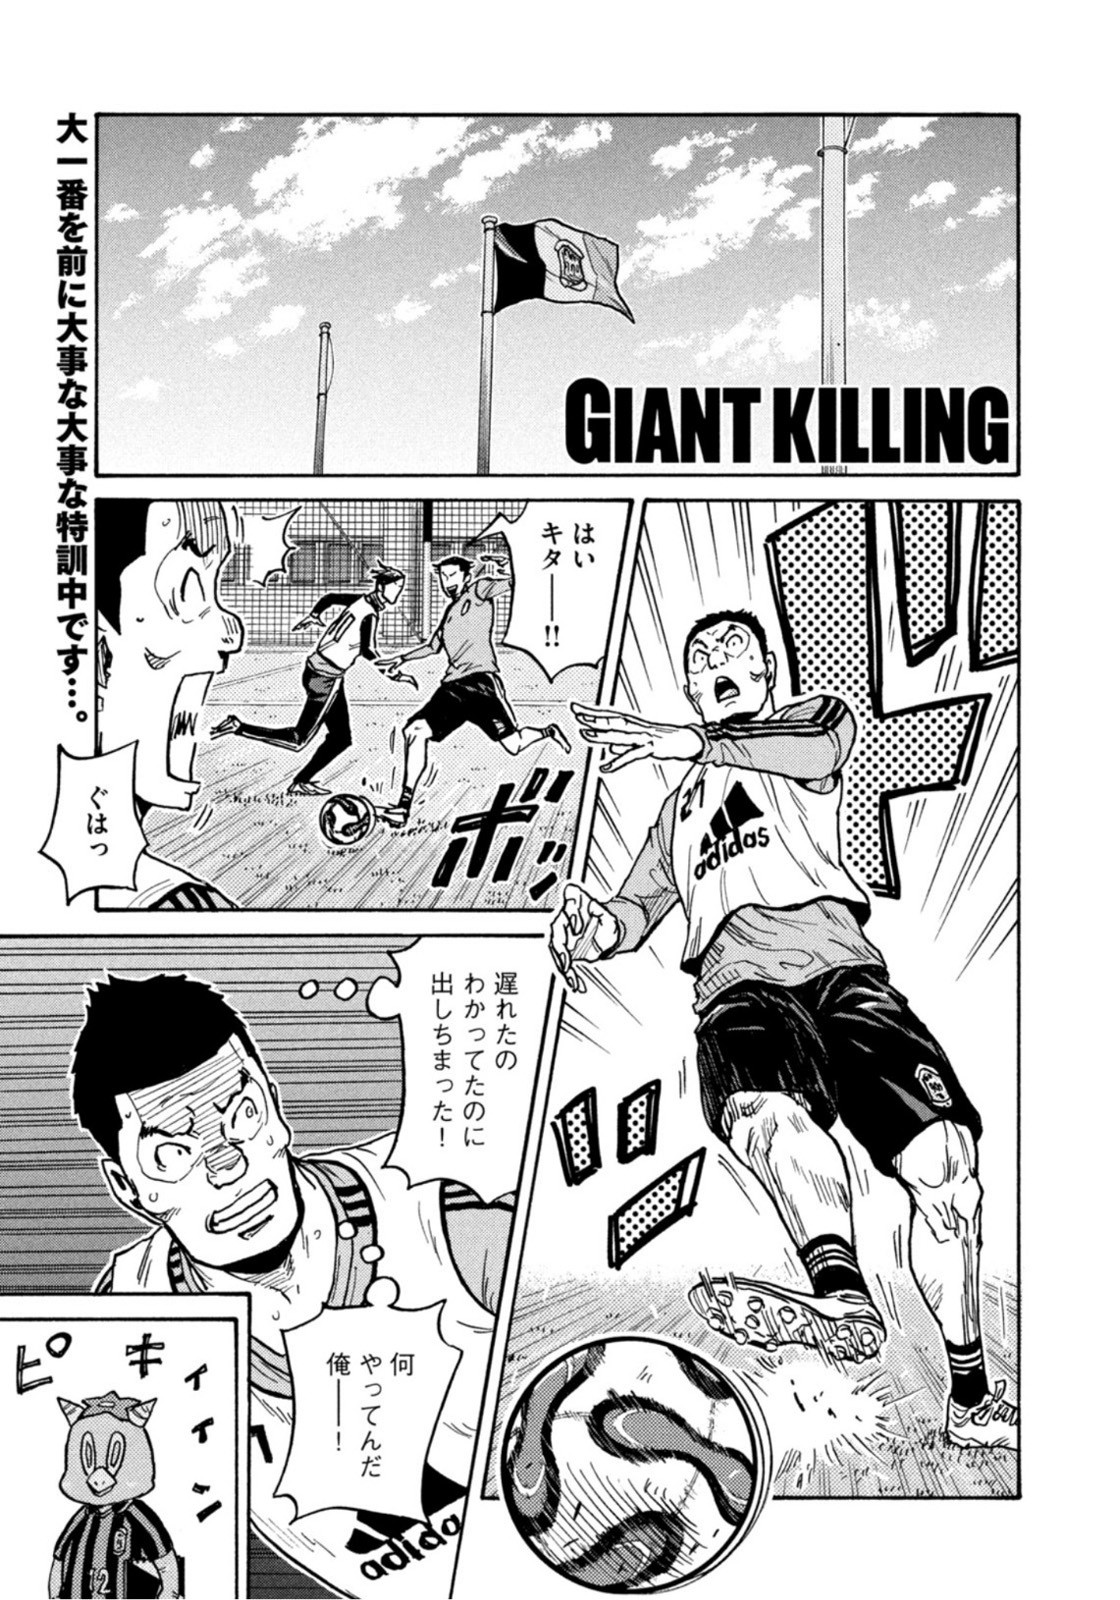 Giant Killing - Chapter 603 - Page 1